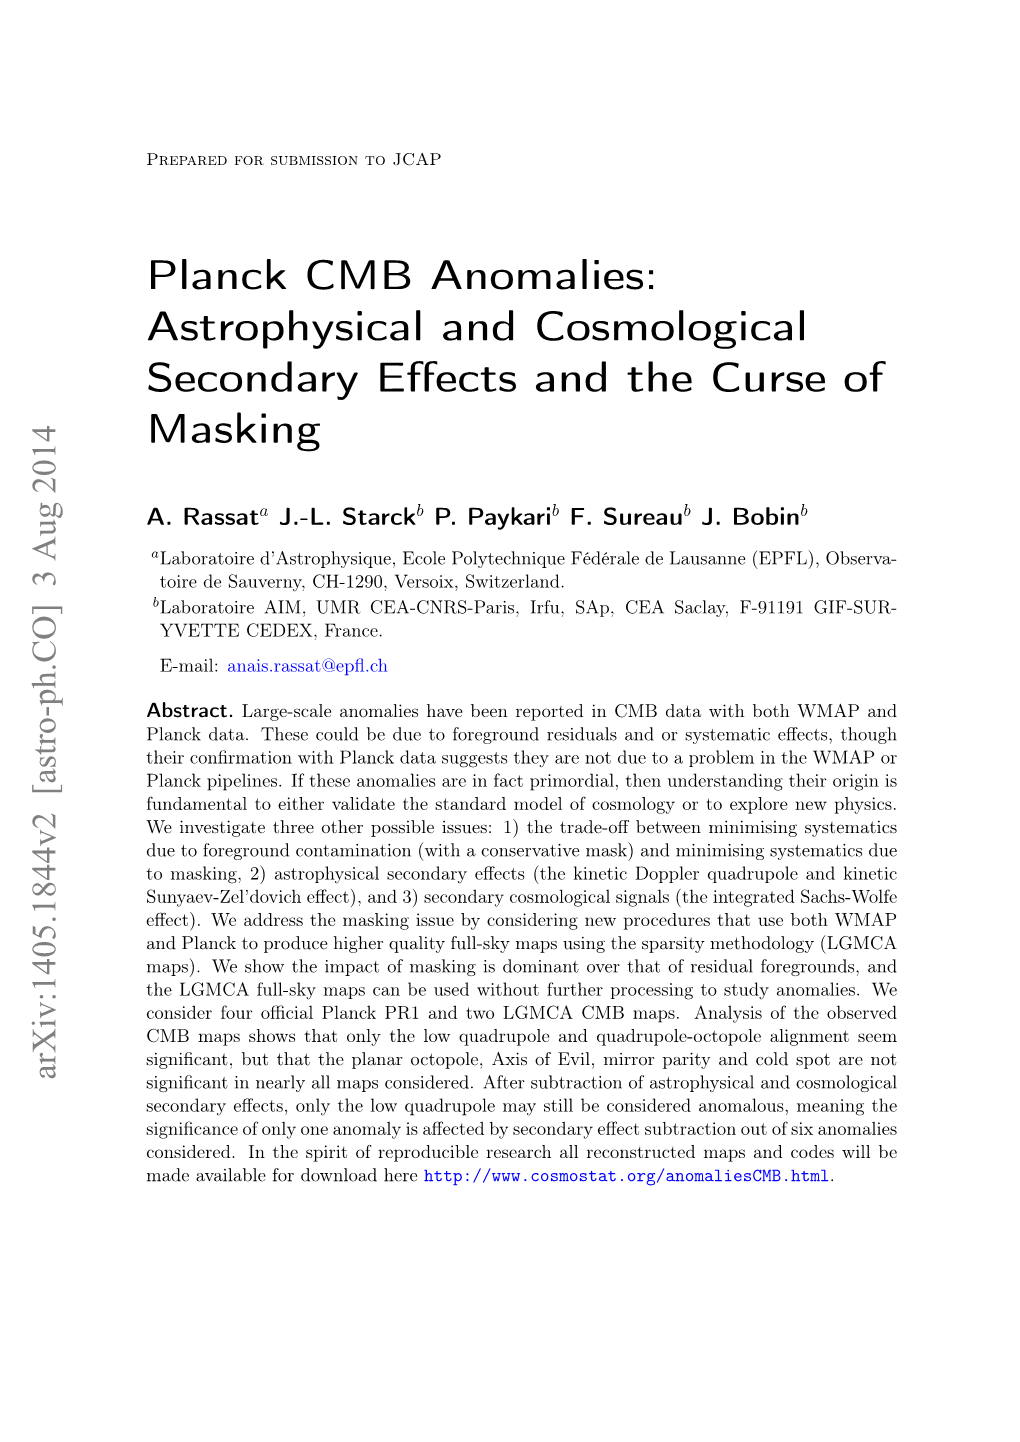 Planck CMB Anomalies: Astrophysical and Cosmological Secondary Eﬀects and the Curse of Masking